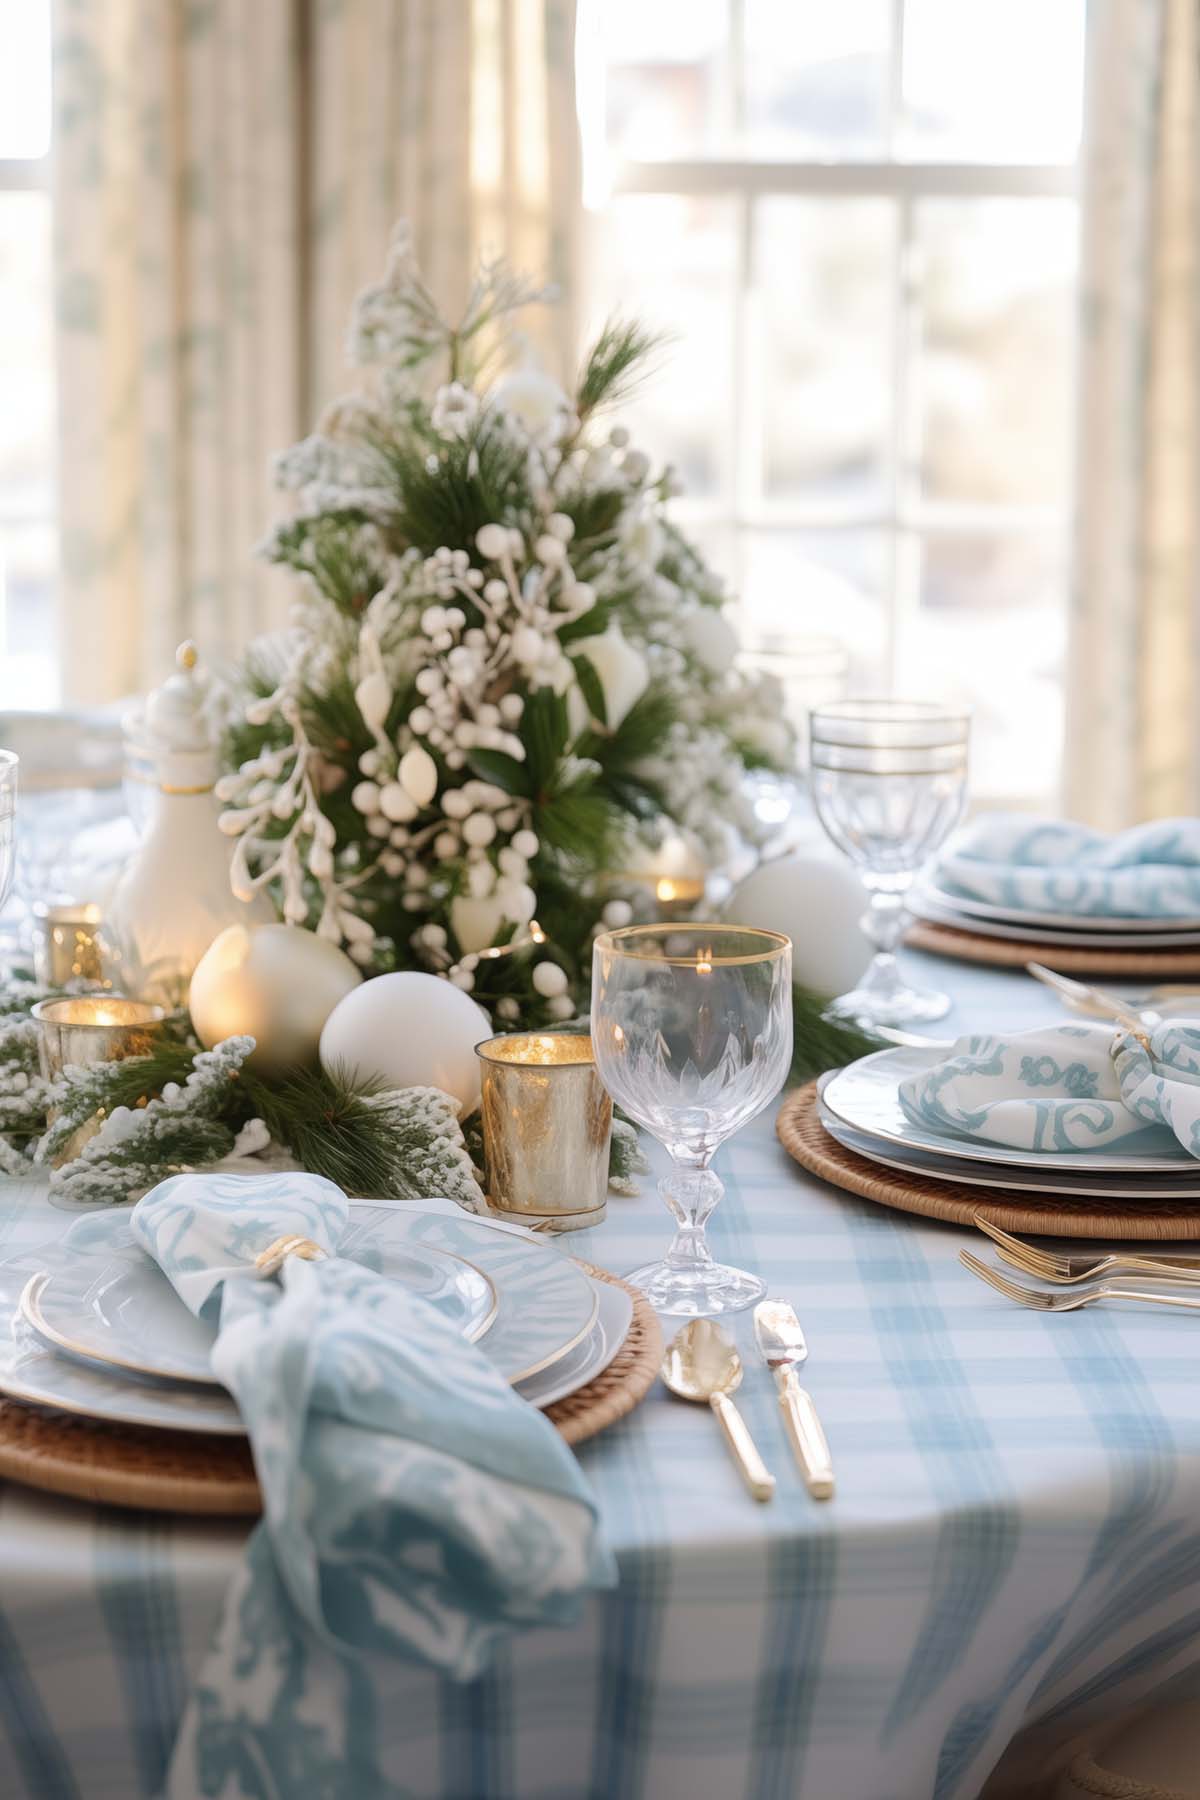 blue gingham tablecloth, wine glasses with gold rims and light blue napkins with a mini Christmas tree centerpiece.